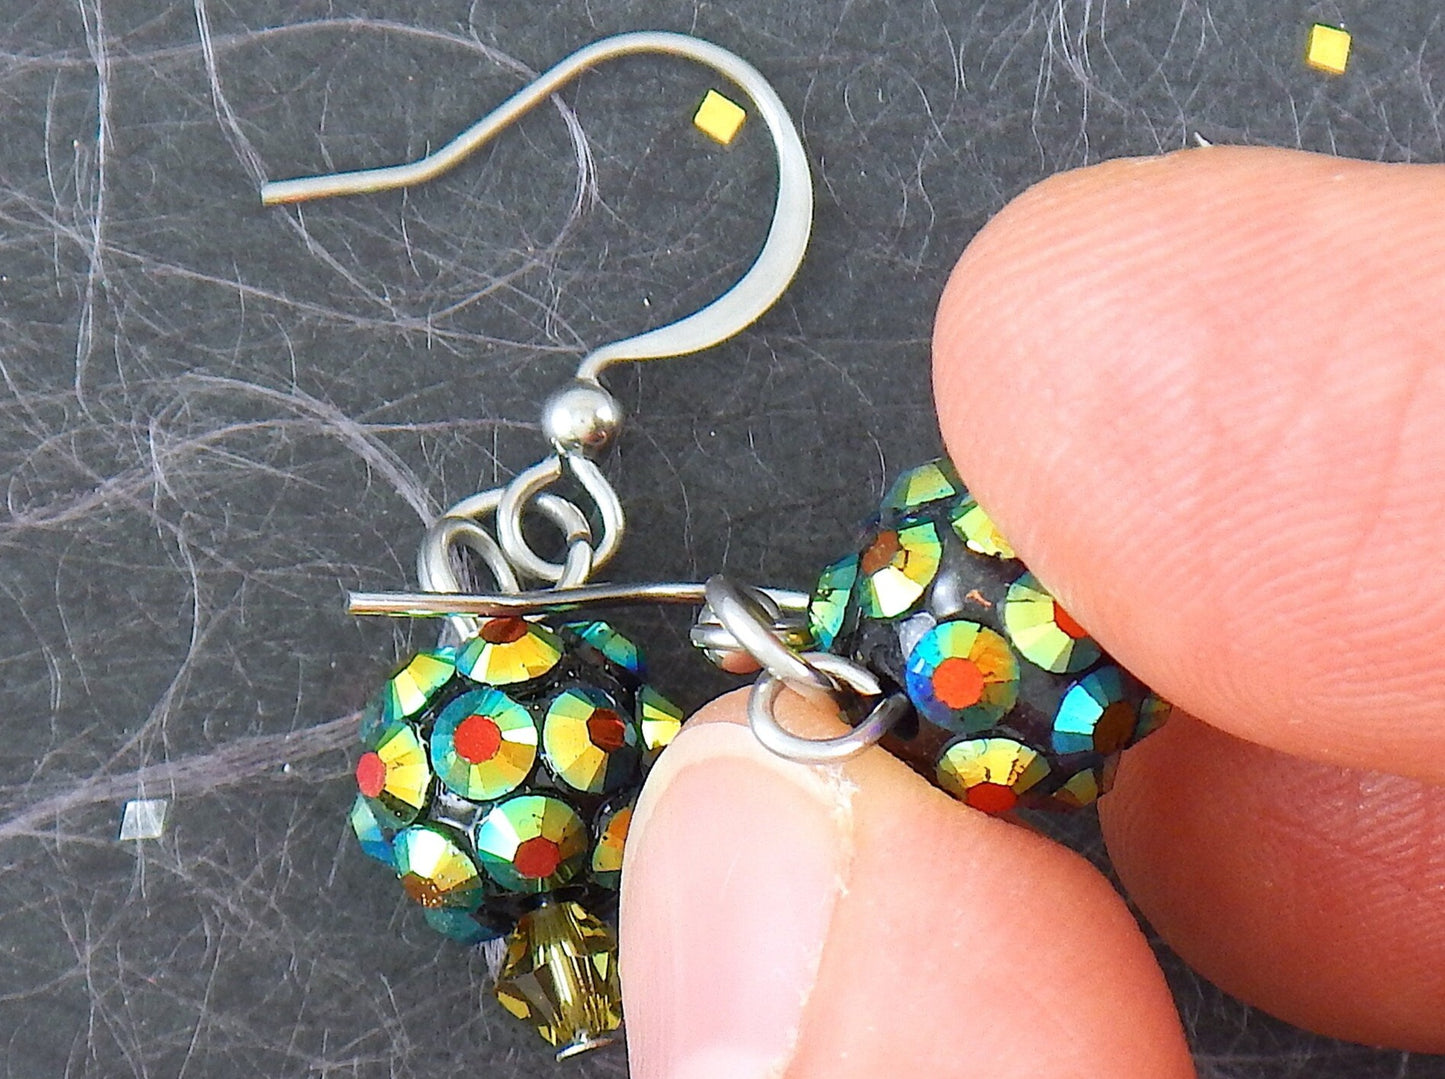 Short earrings with tiny crystal disco balls in golden green, stainless steel hooks